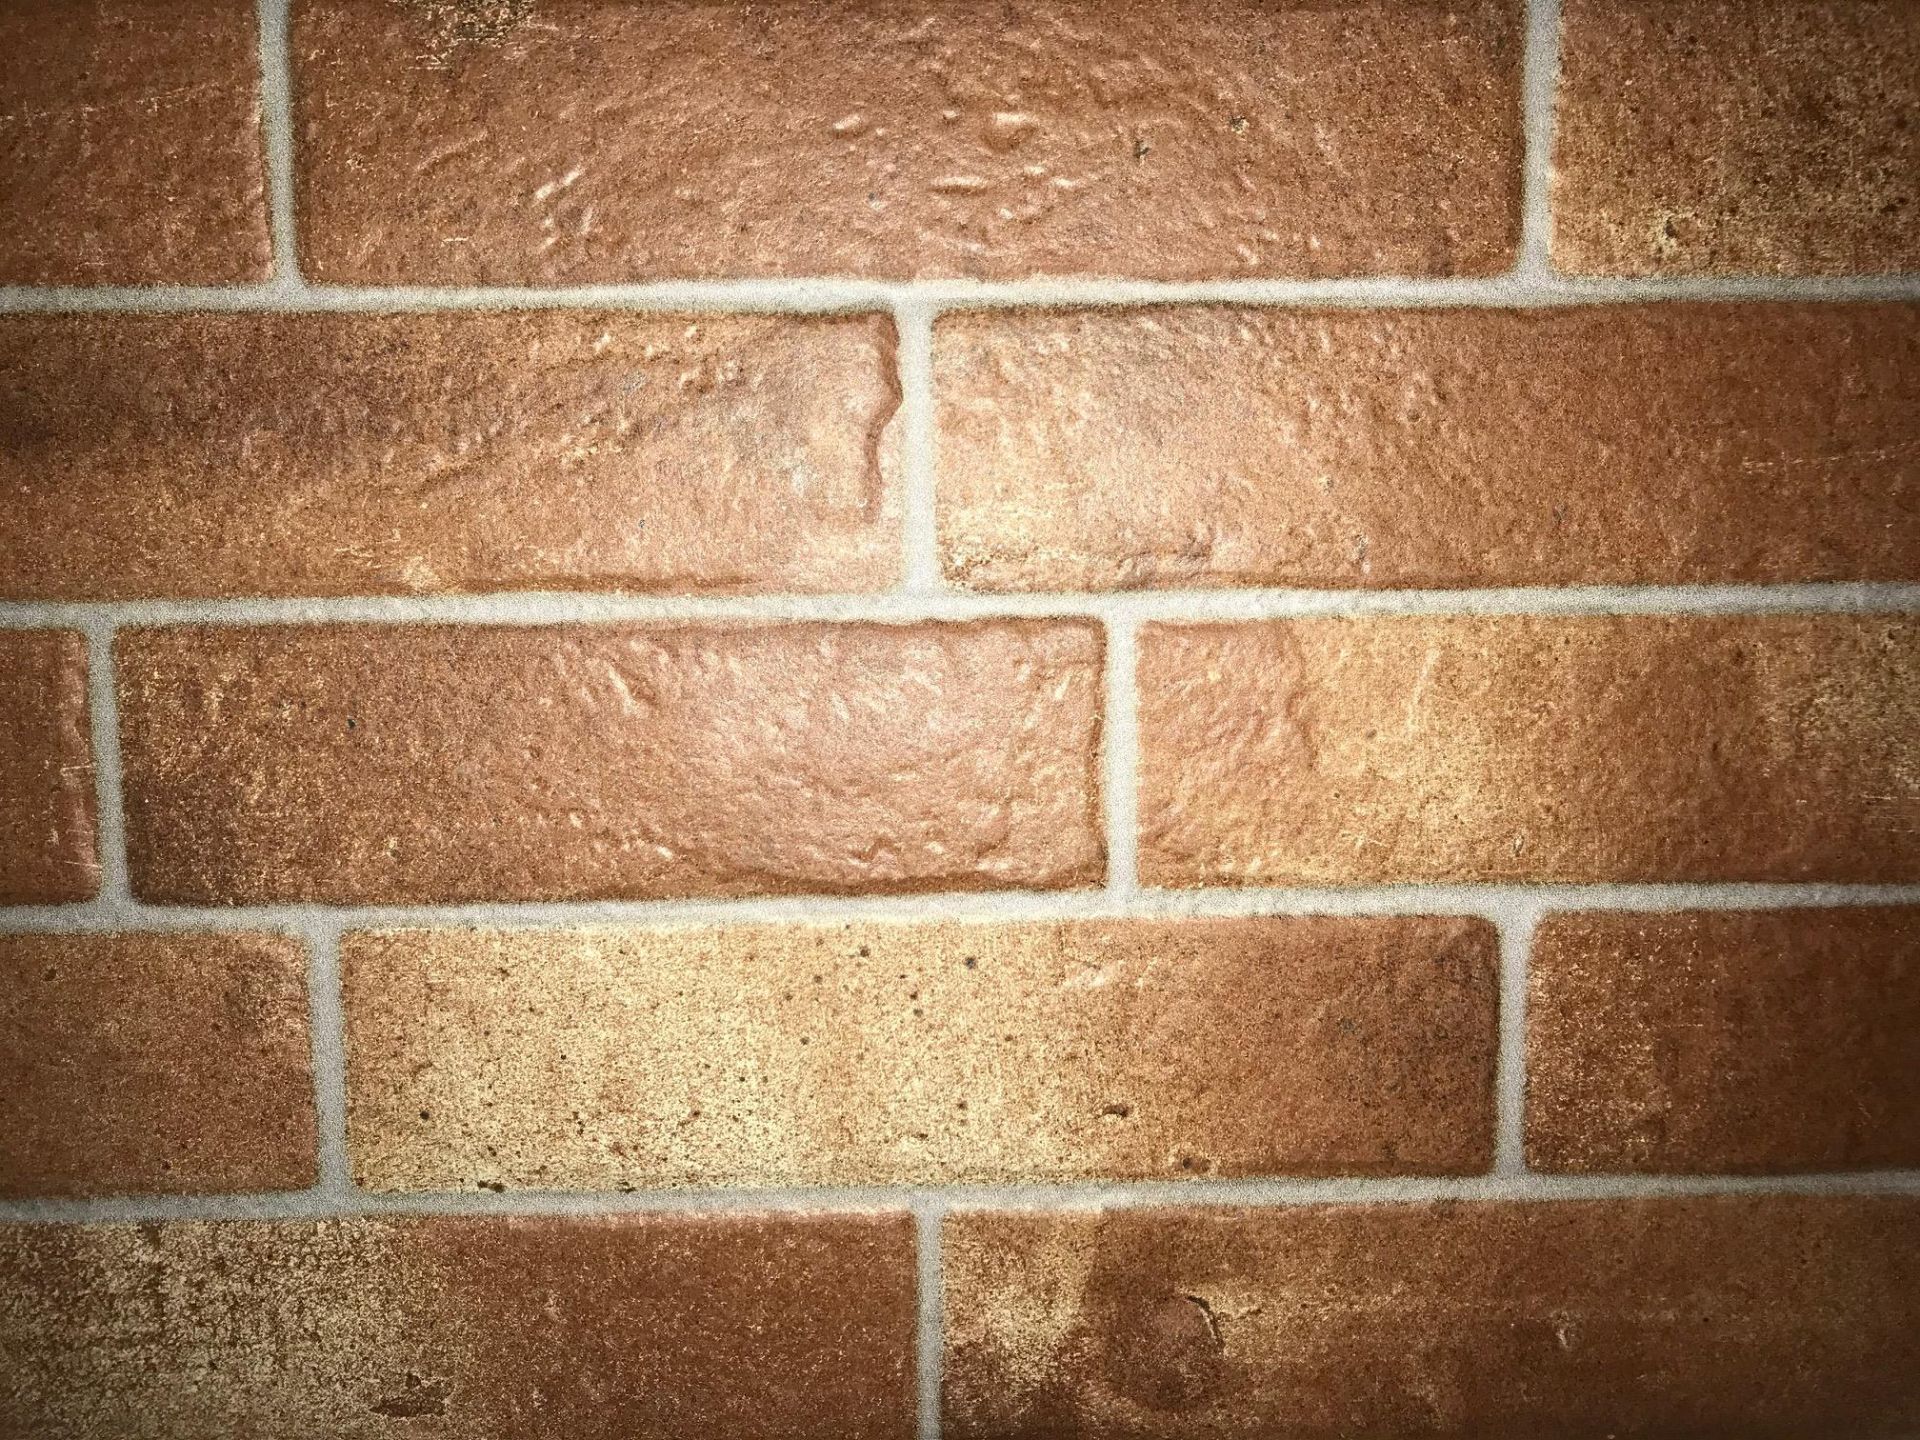 9m2 Modern Brick Effect Ceramic Tiles. 25x50cm, Inspired by the raw look of exposed brick walls... - Image 3 of 4